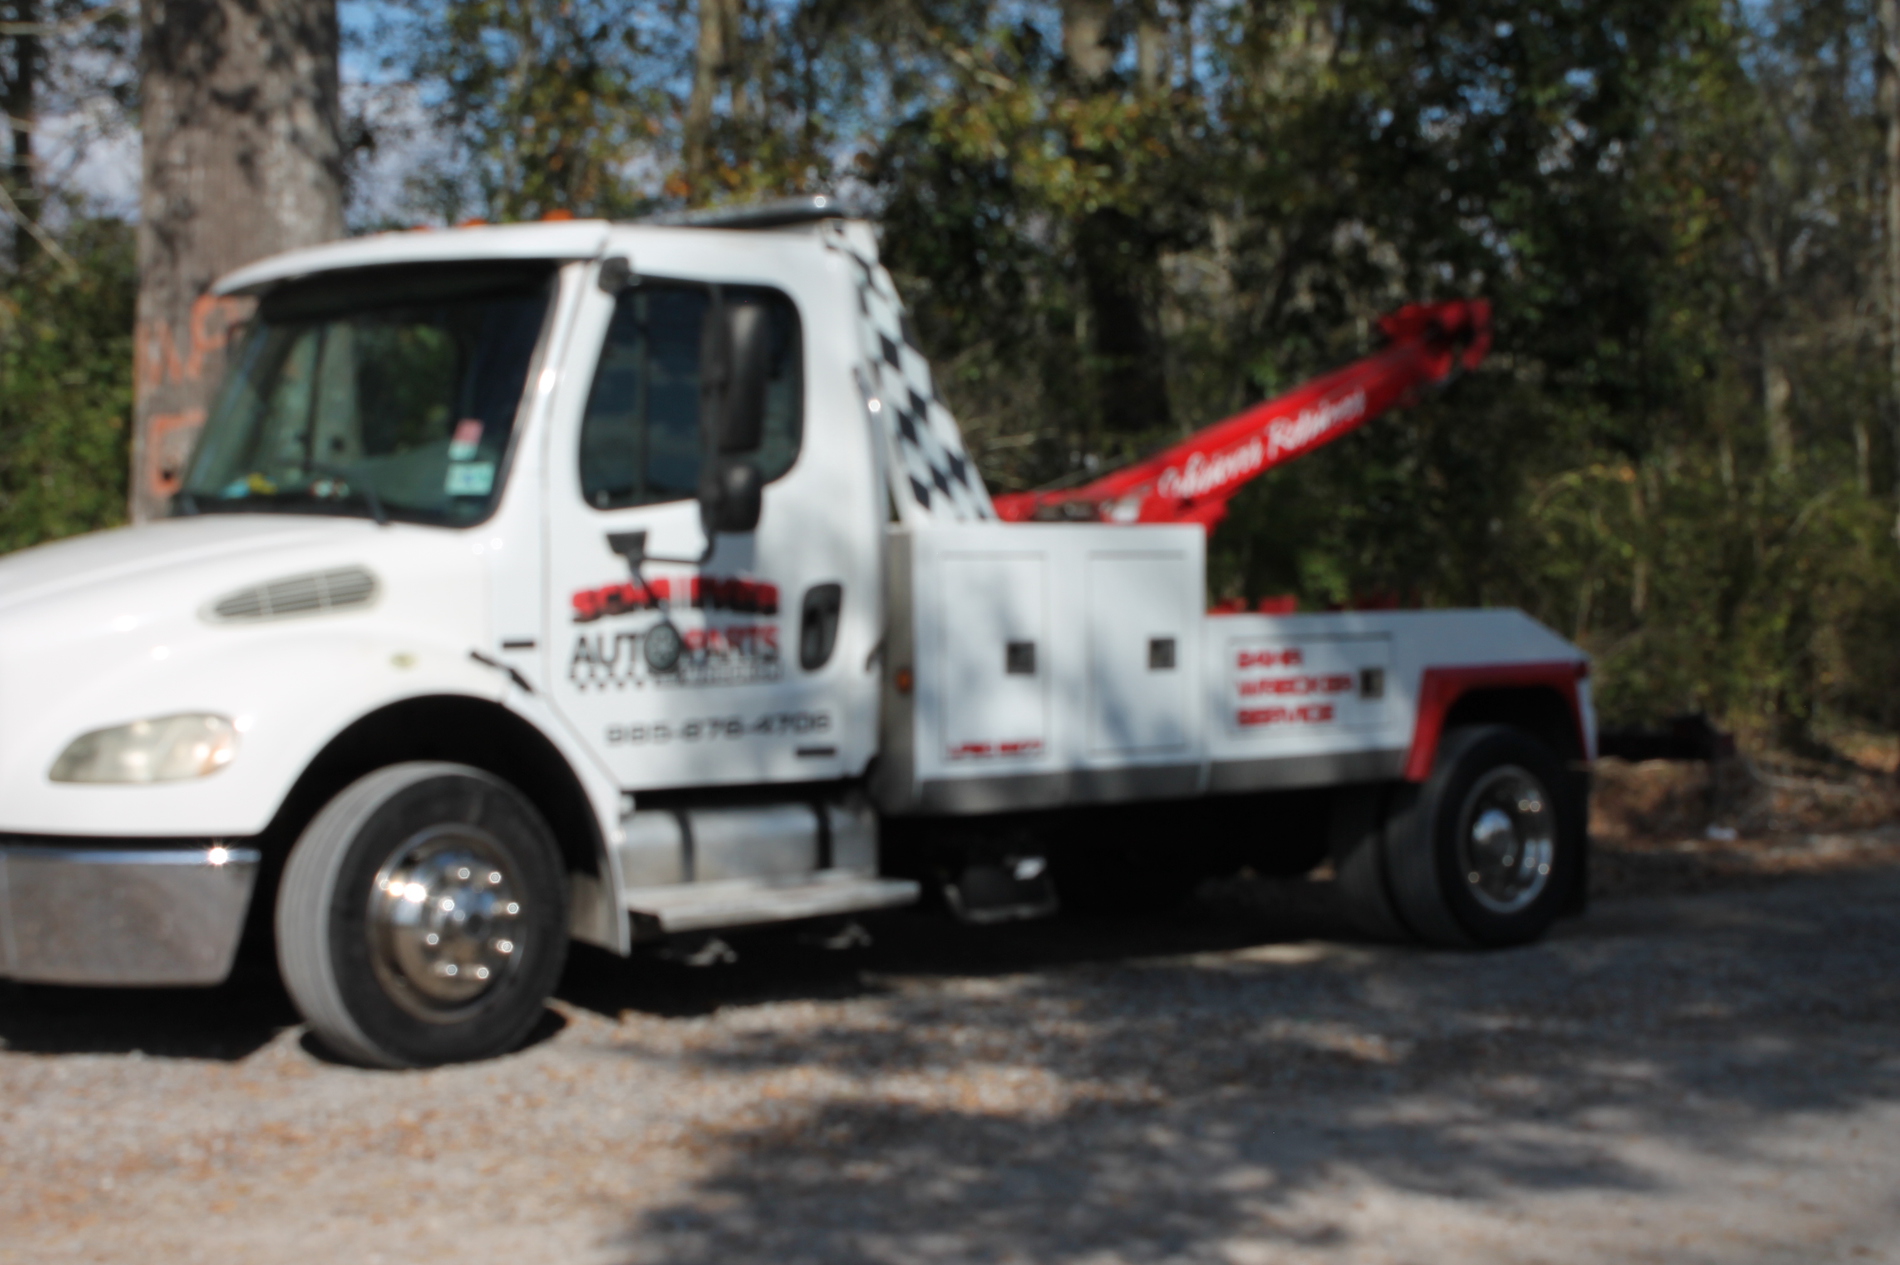 Images Schriever Auto Parts and Wrecker Service